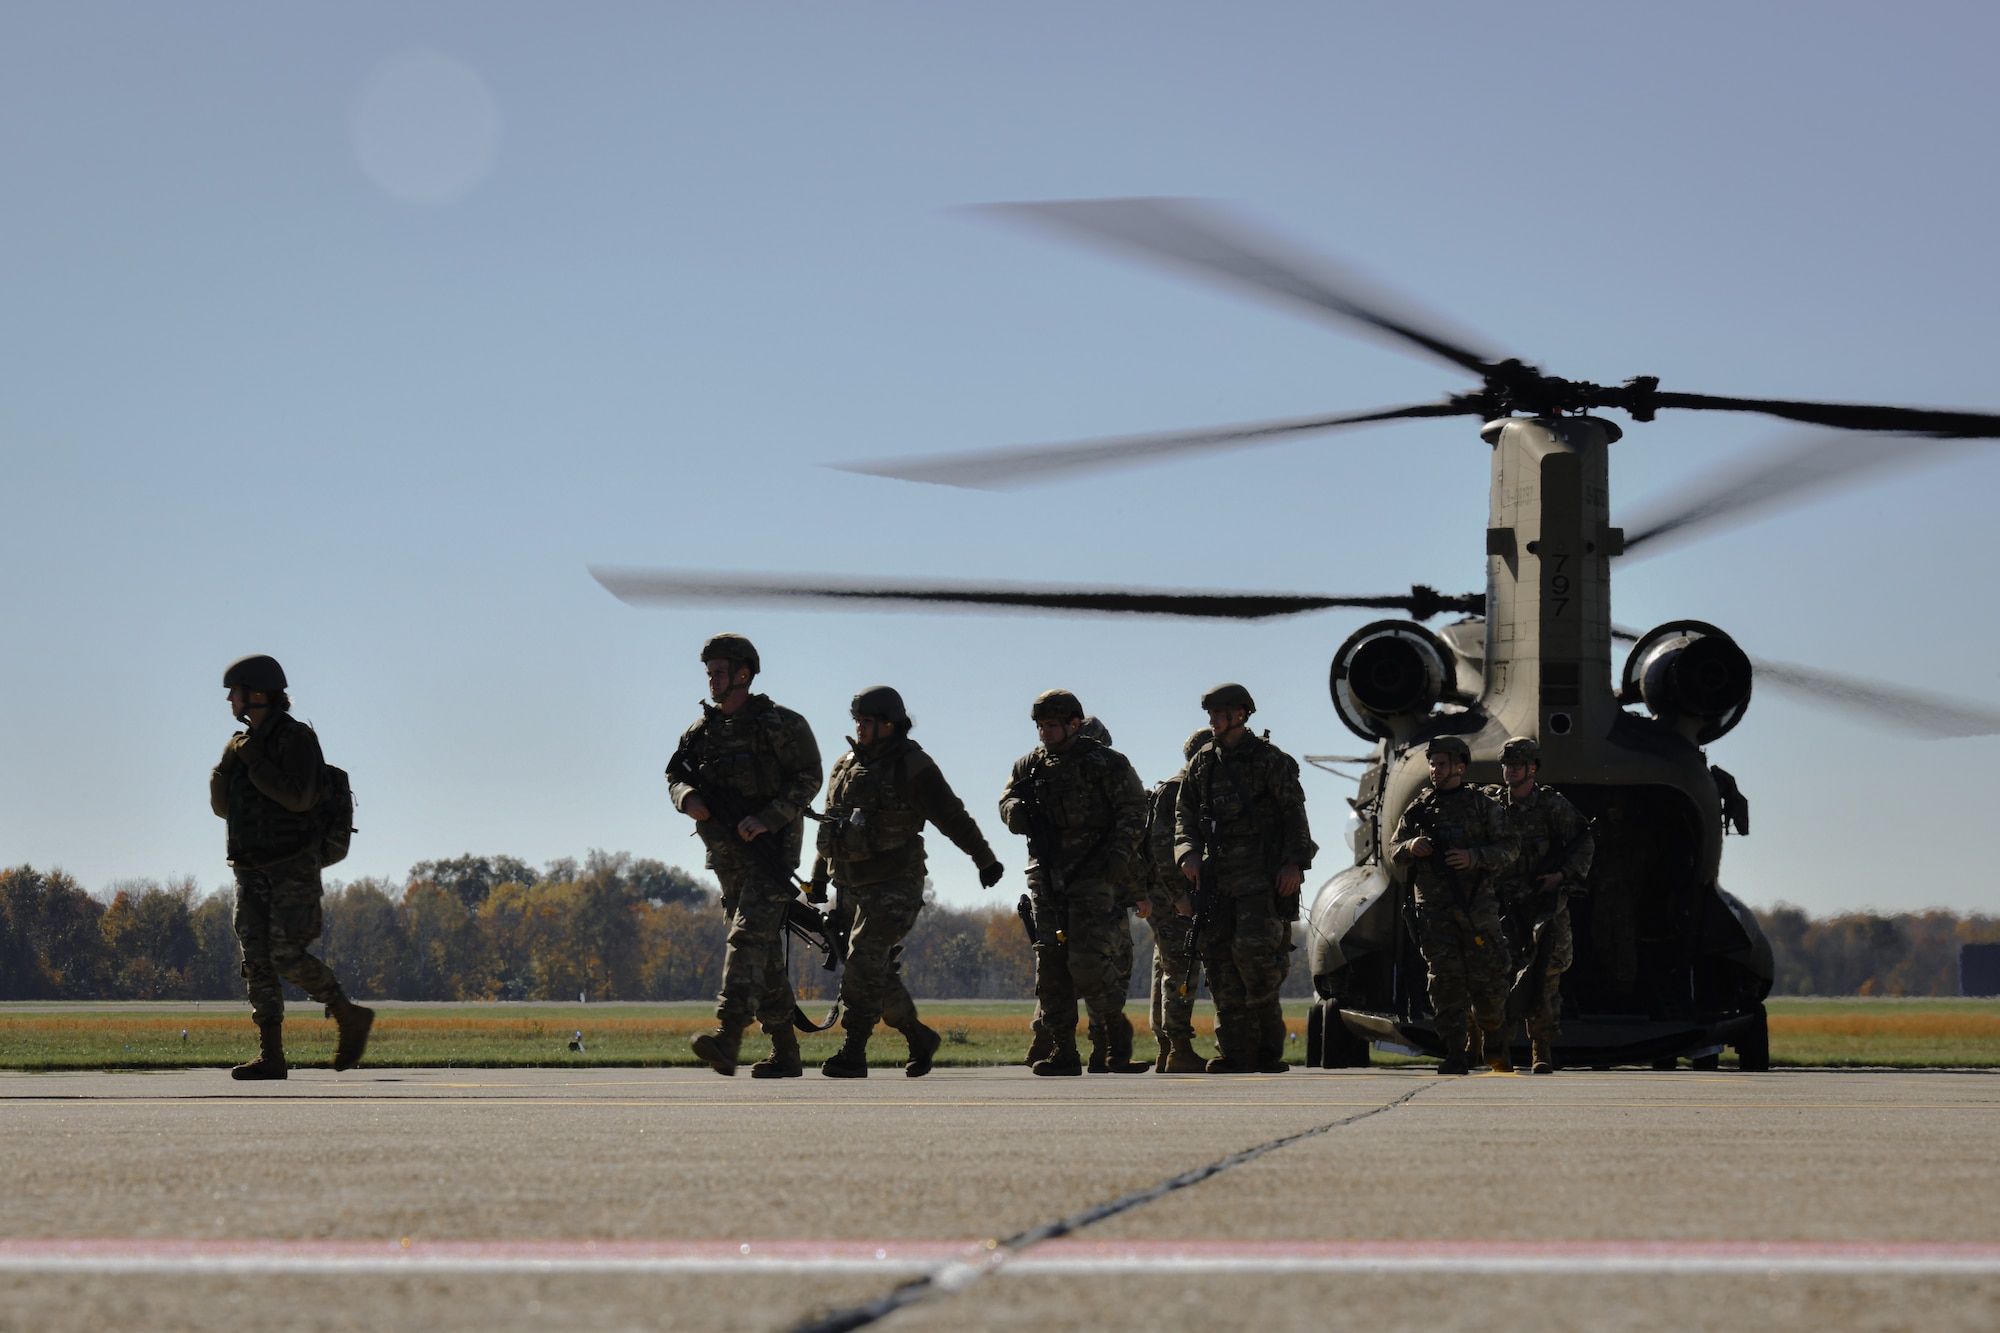 910th Security Forces Squadron members exit an Ohio Army National Guard CH-46 Chinook helicopter after combat training at Camp James A. Garfield Joint Military Training Center, Ohio, Nov. 6, 2021.